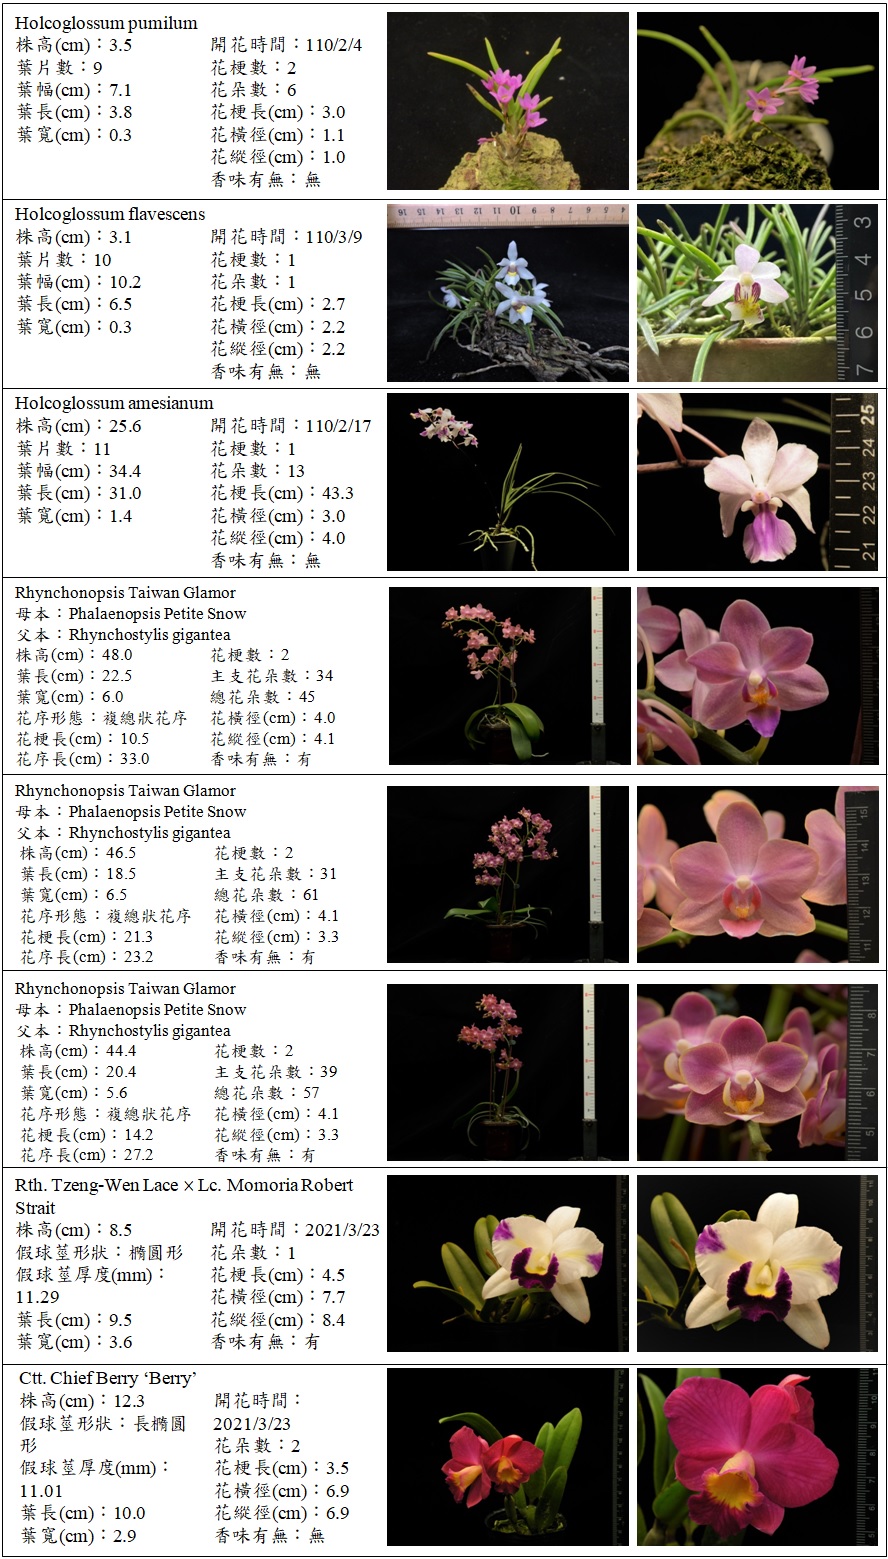 Fig. 1. Complete the collection and characters investigation of Holcoglossum spp., Rhychonopsis Taiwan Glamour and Cattleya spp.